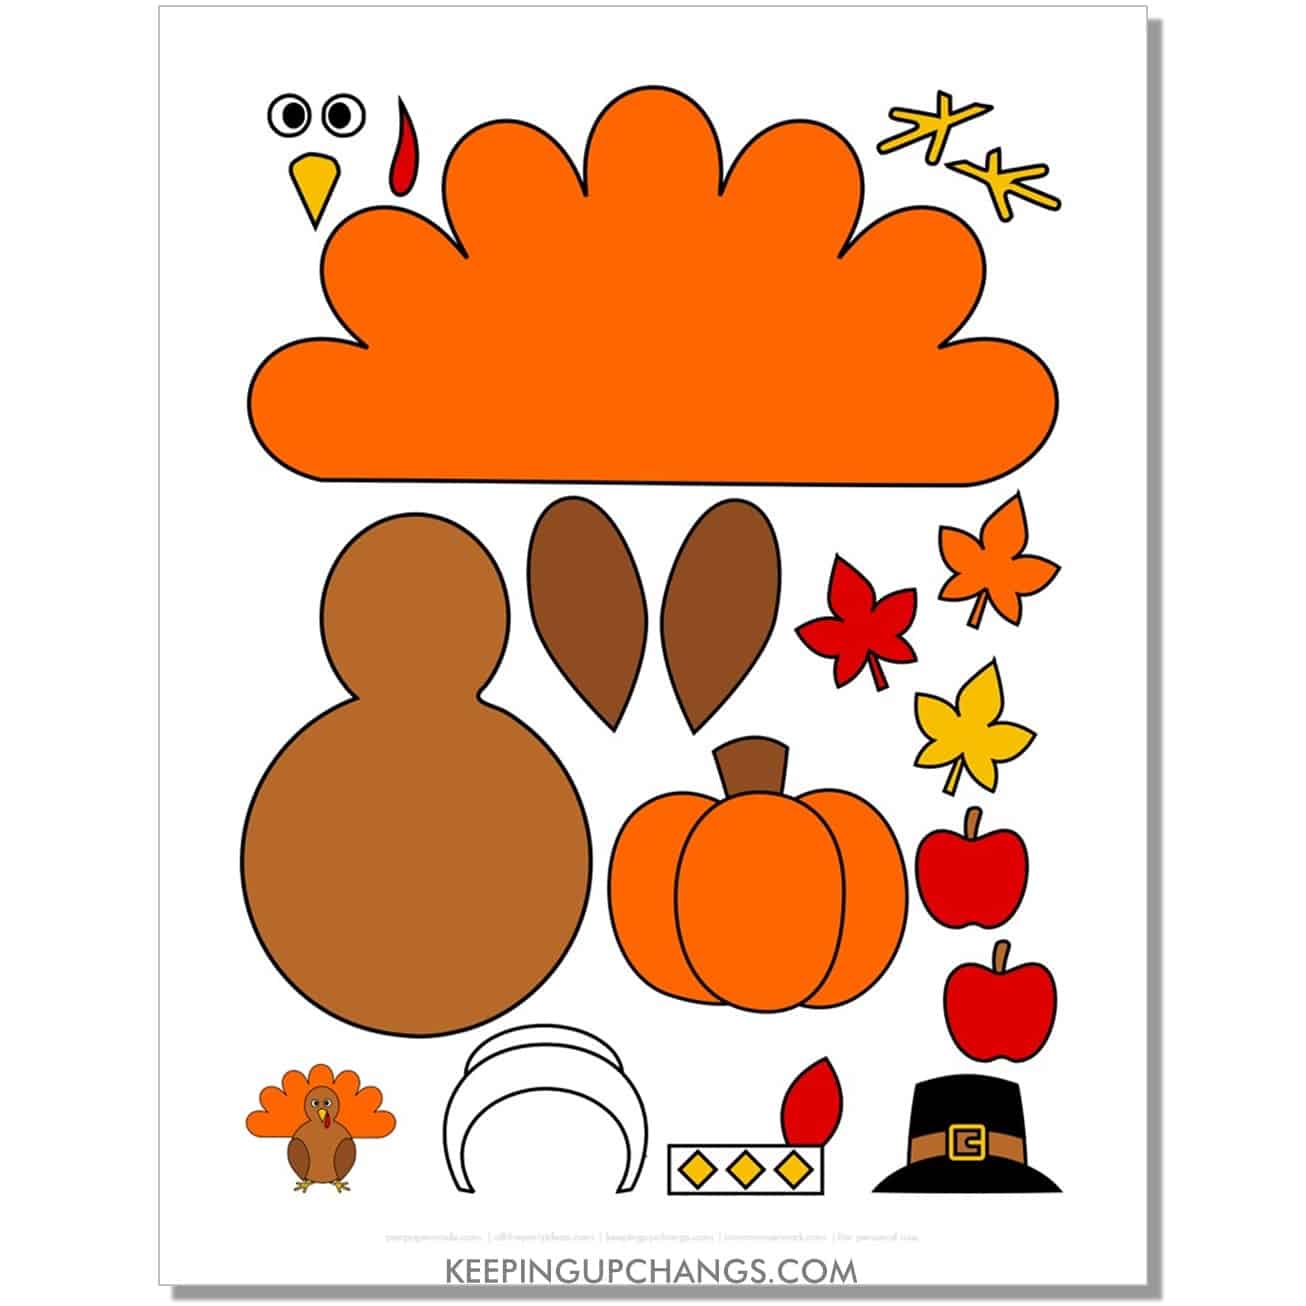 easy build a turkey template for preschool with feathers, body, hat, accessories in color.